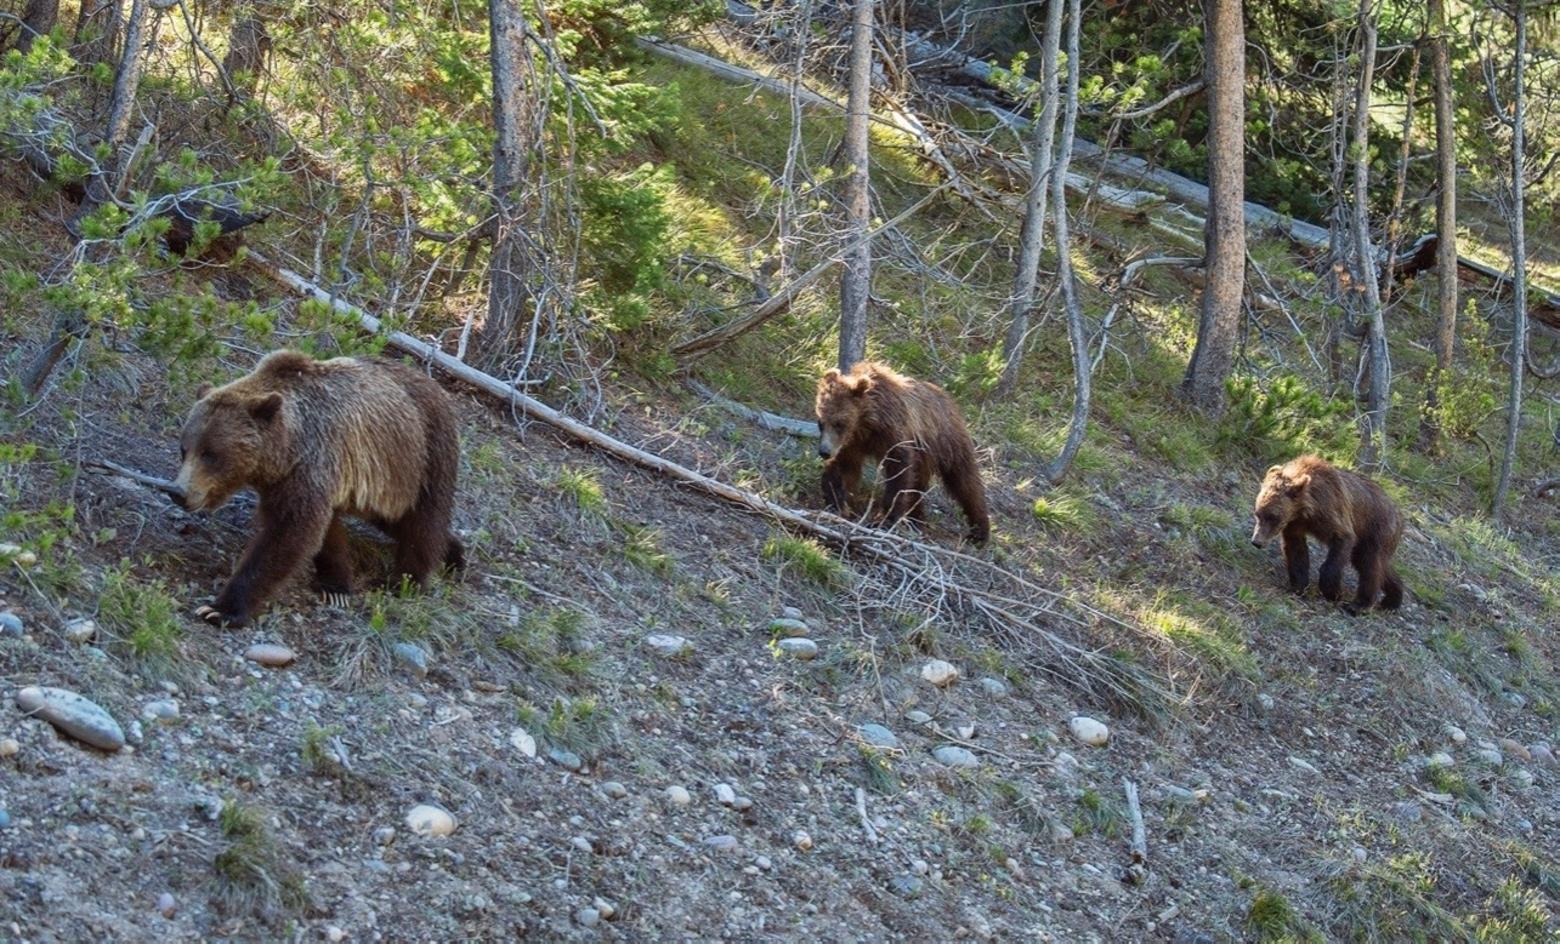 Grizzly mother and cubs, photo by Thomas D. Mangelsen (mangelsen.com)